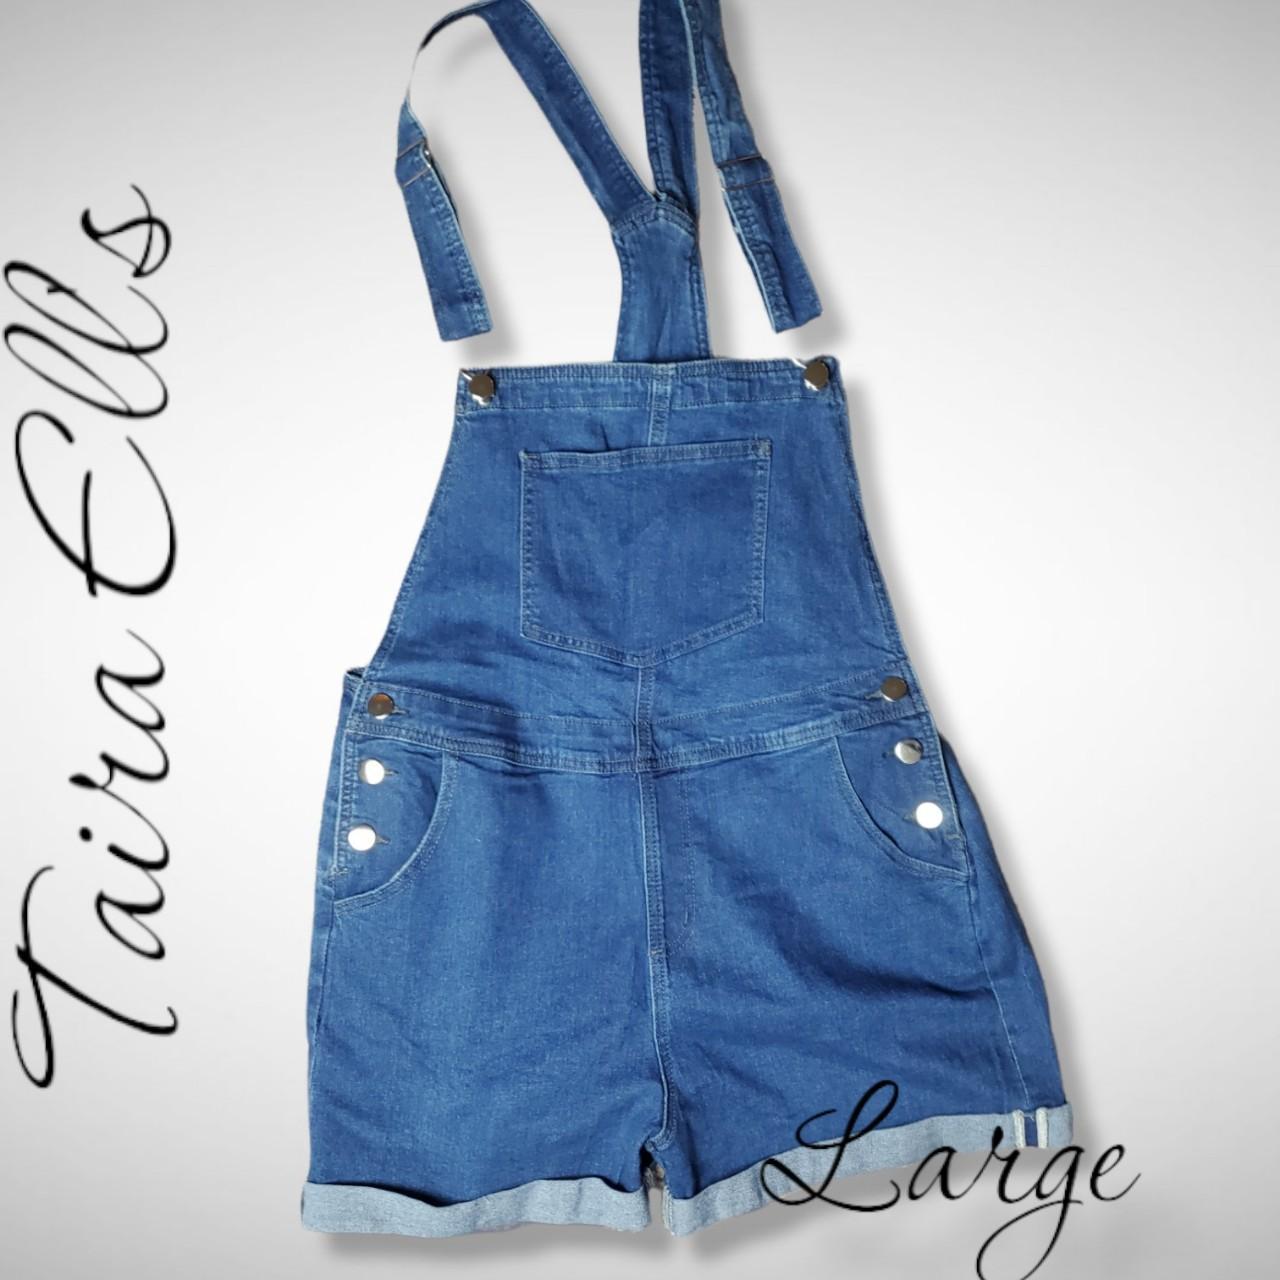 Product Image 1 - Denim Overall Shorts.
Size Large
The measurements